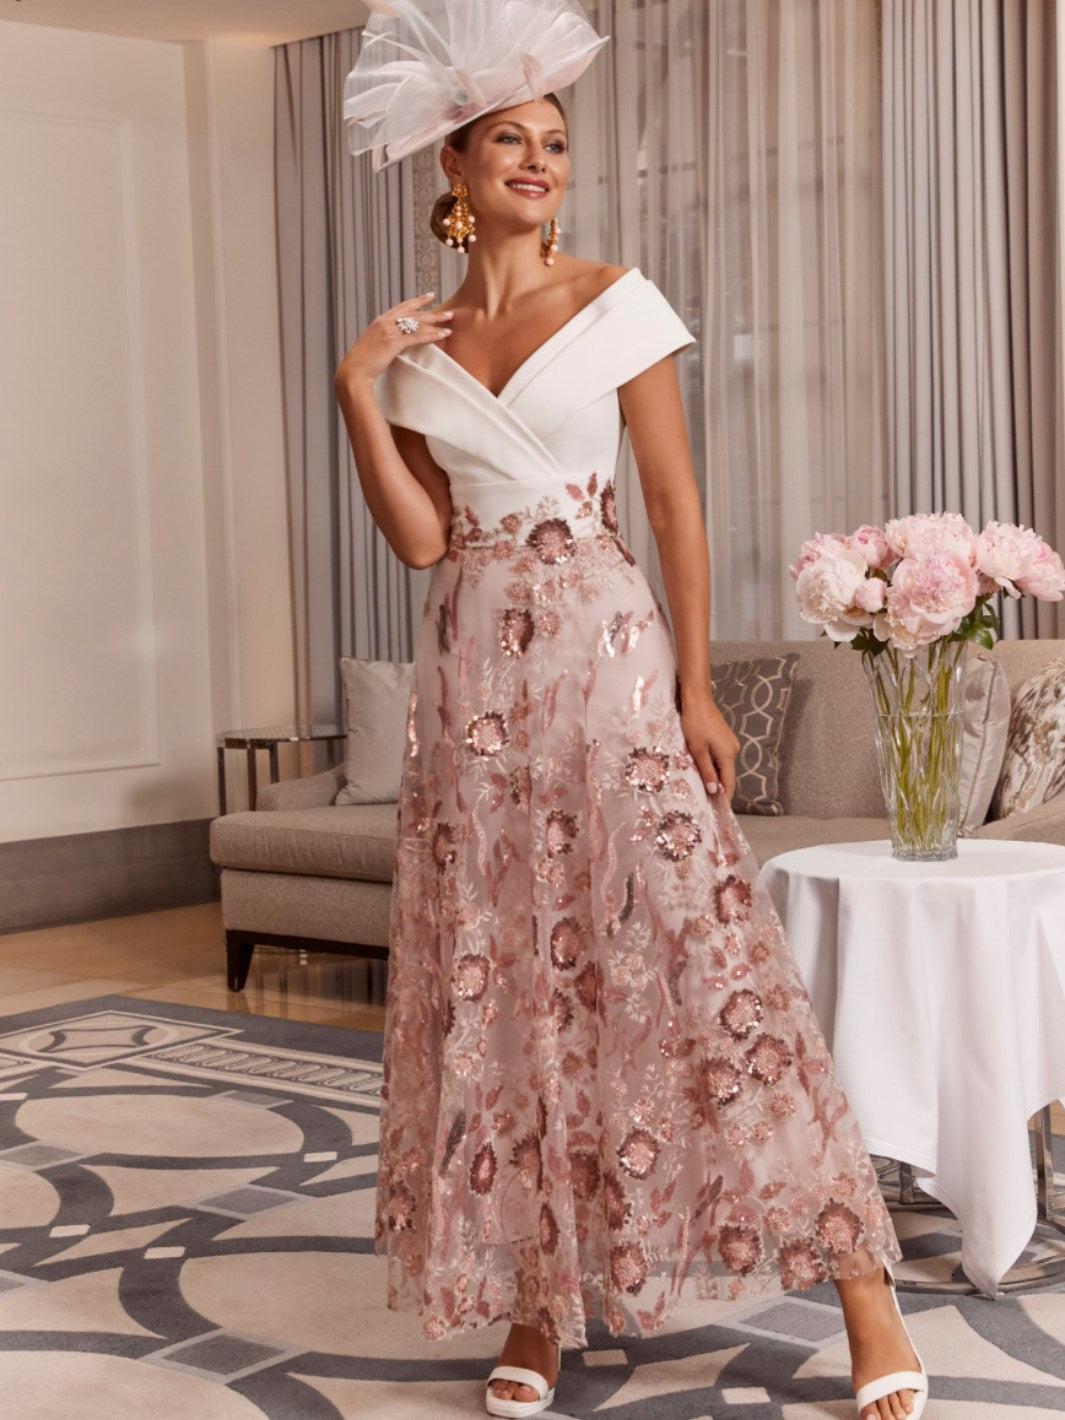 Veni Infantino Dress 992031 In Ivory / Dusty Rose Pink-Mother of the bride- mother of the groom -Nicola Ross